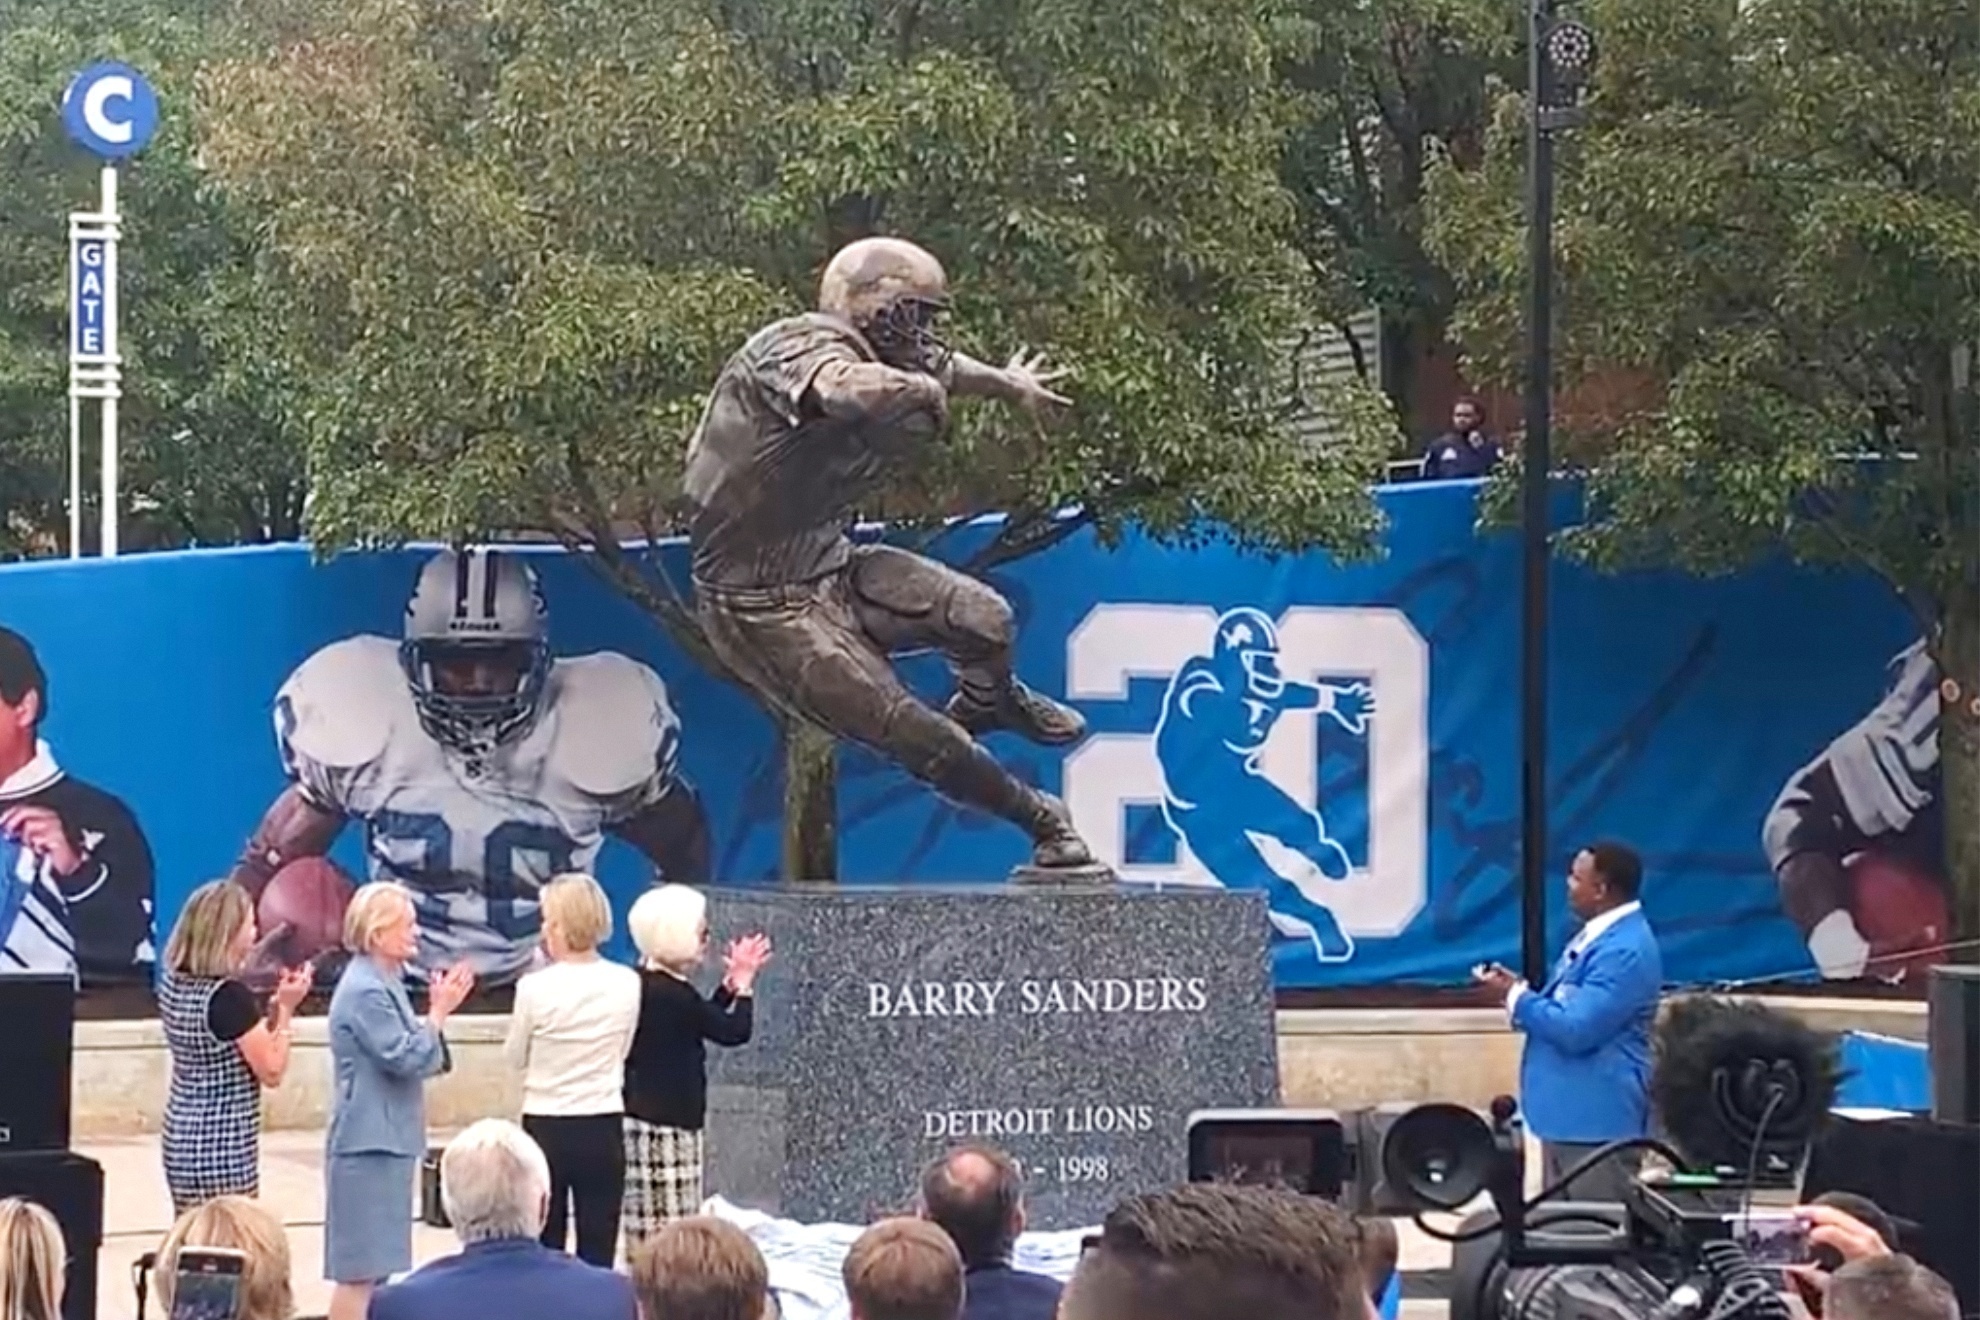 The Barry Sanders statue at Ford Field.